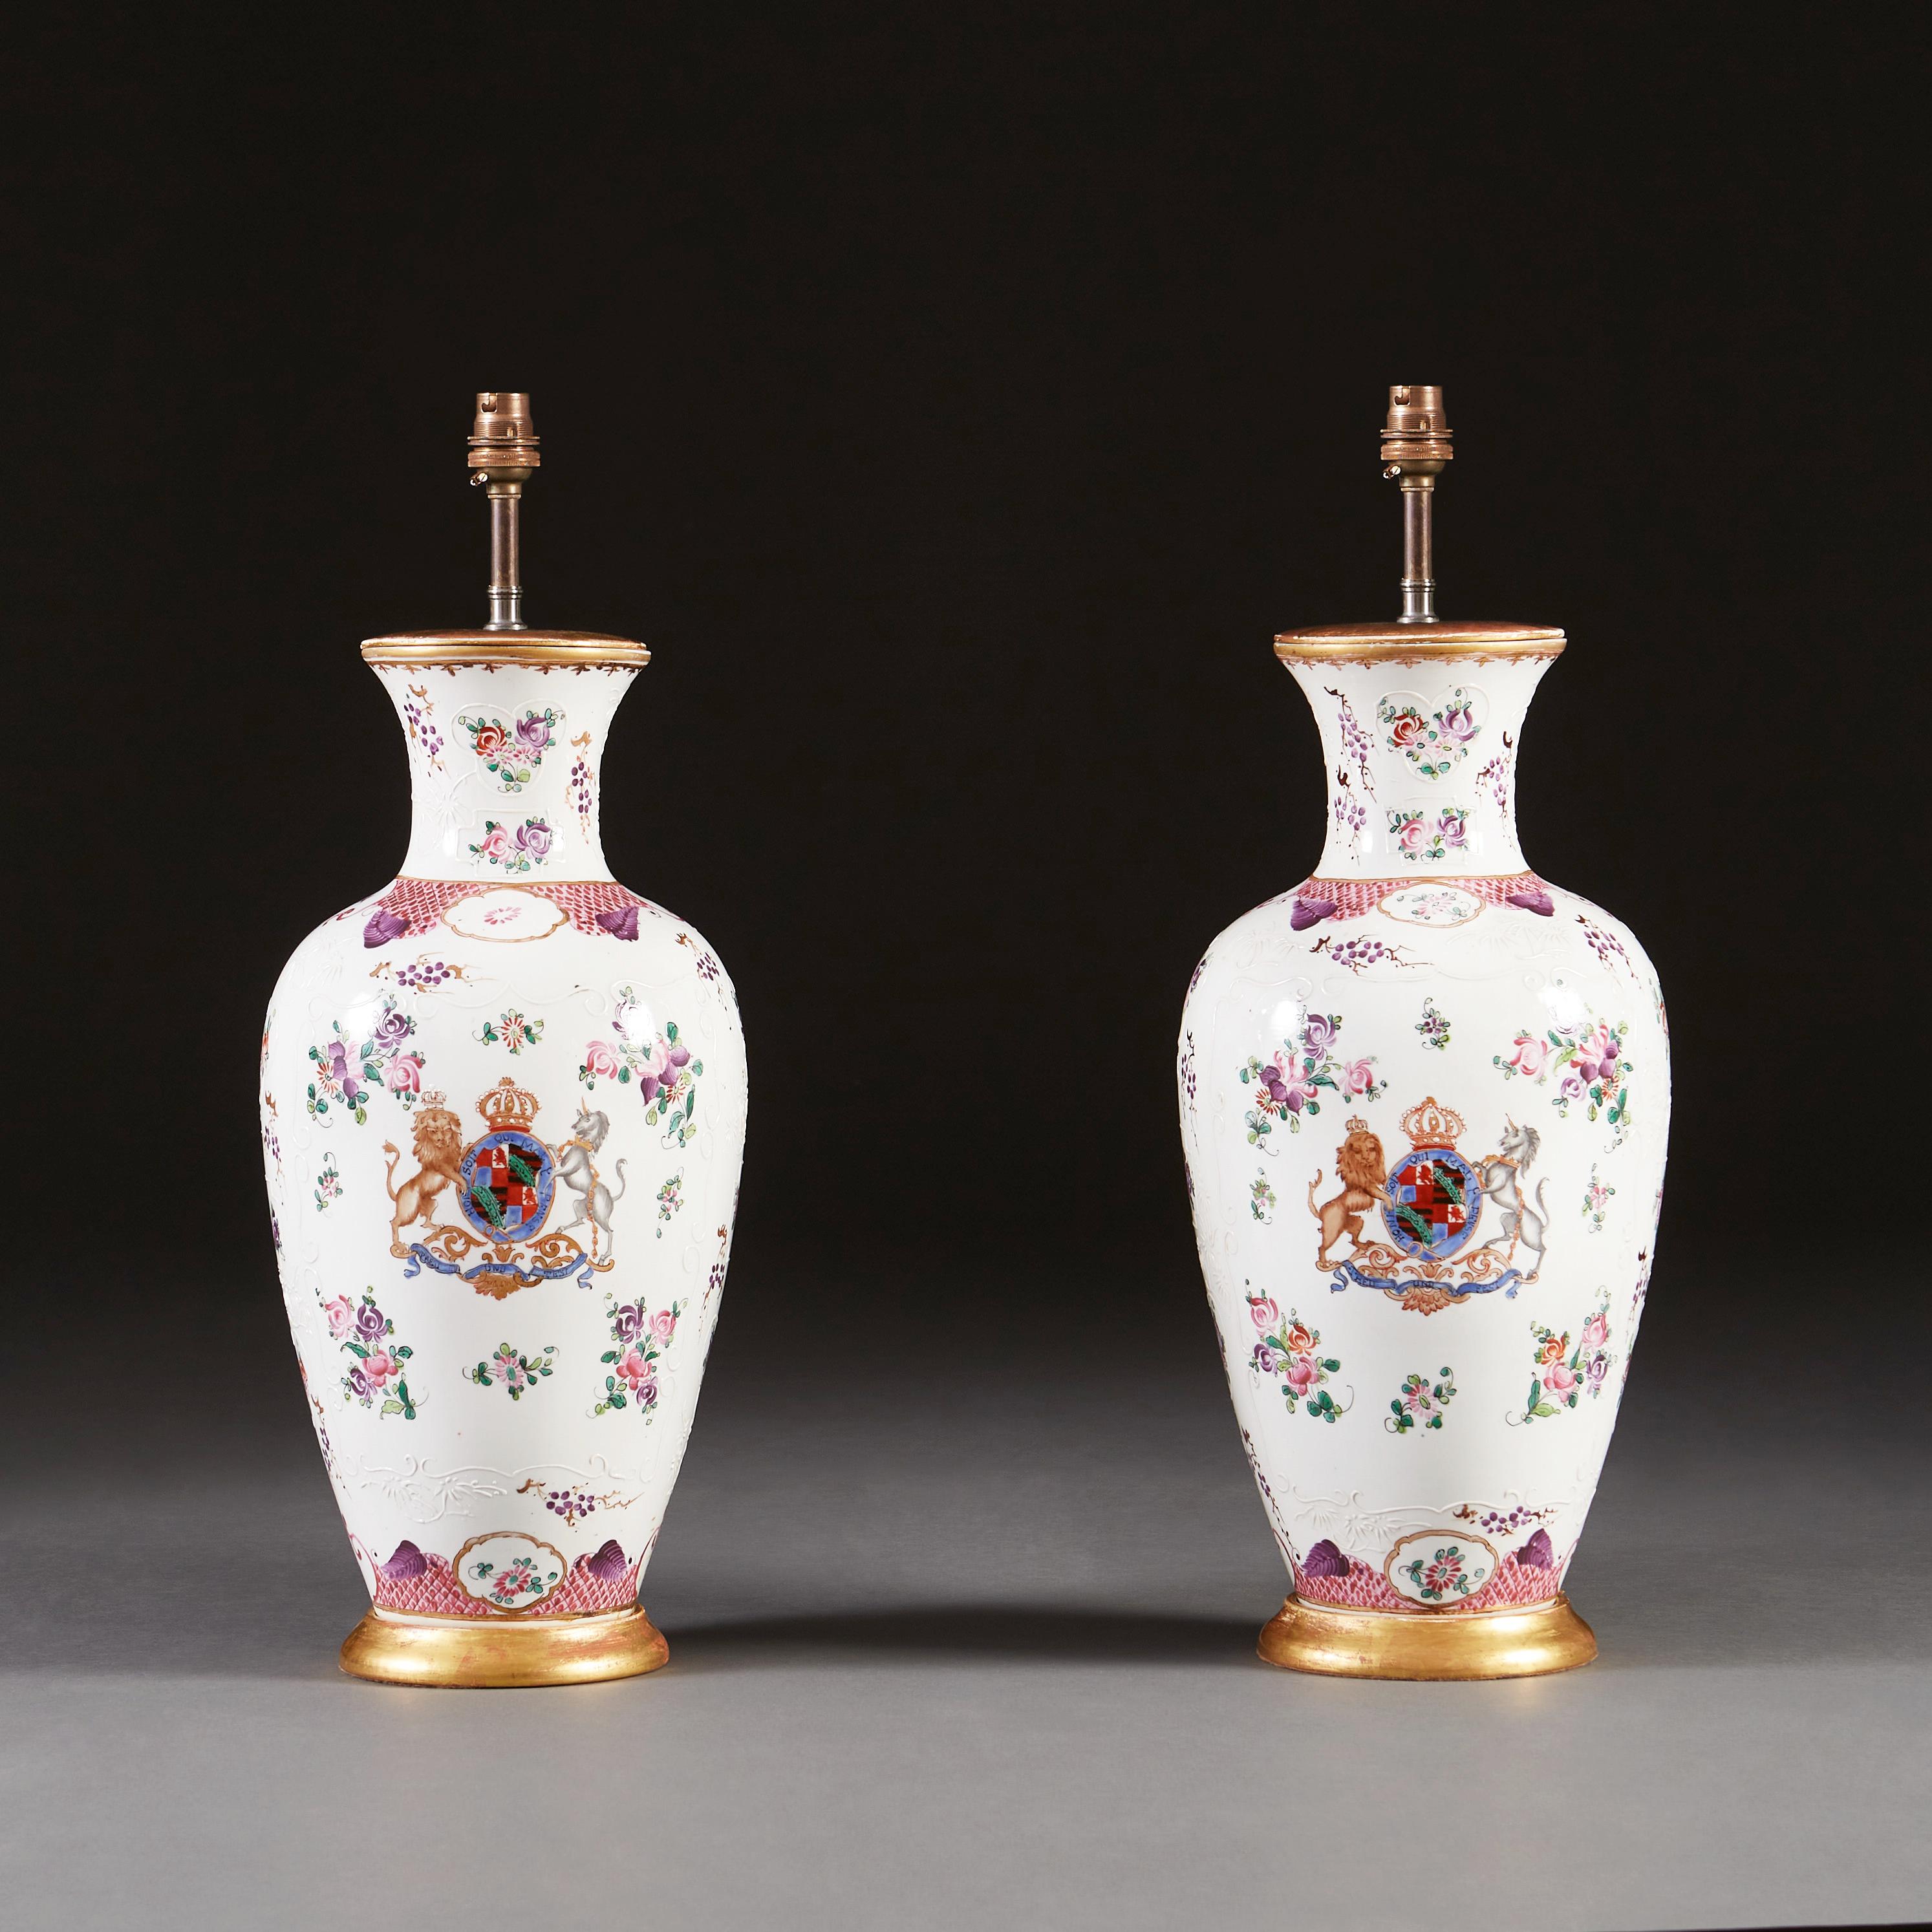 A pair of late nineteenth century Samson armorial vases, decorated with floral patterns and a central coat of arms to the front, on a white ground, now mounted as lamps with turned giltwood bases.

Please note: lampshades not